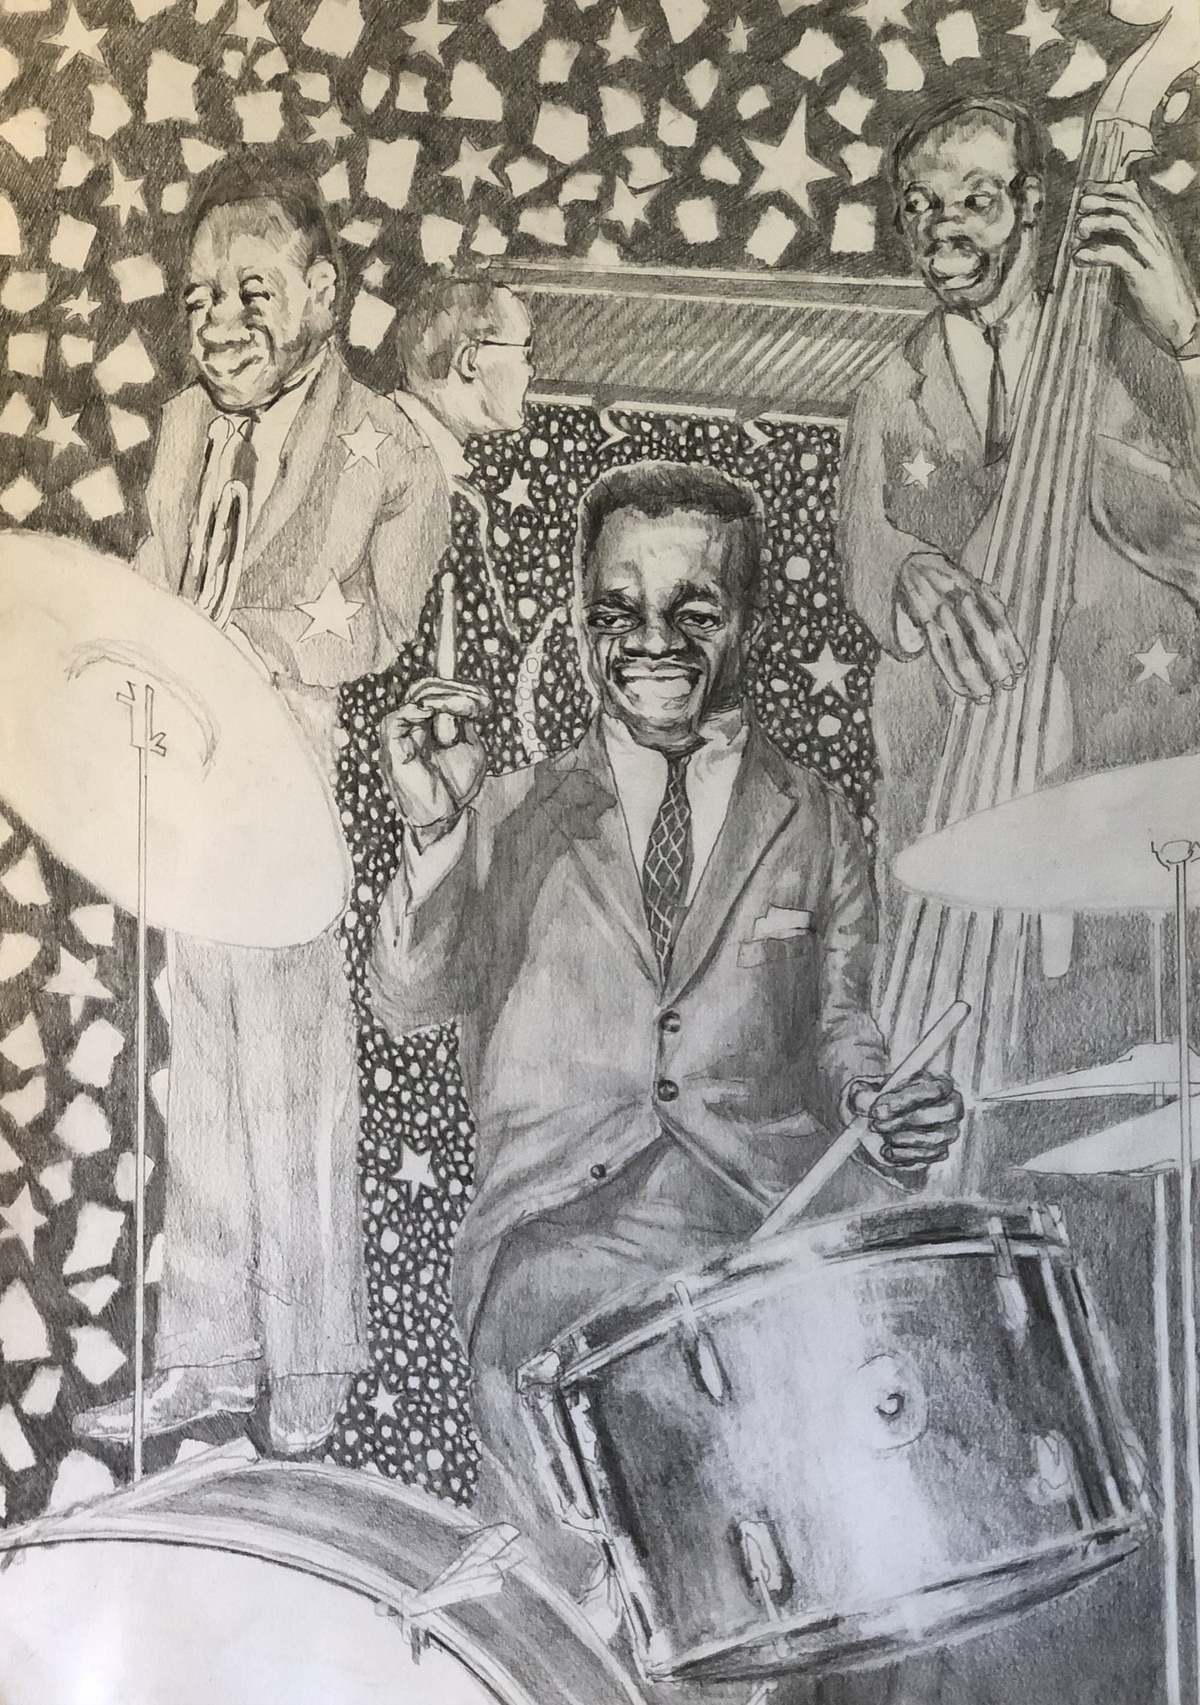 A pencil drawing on paper of four men playing instruments against a starry background.